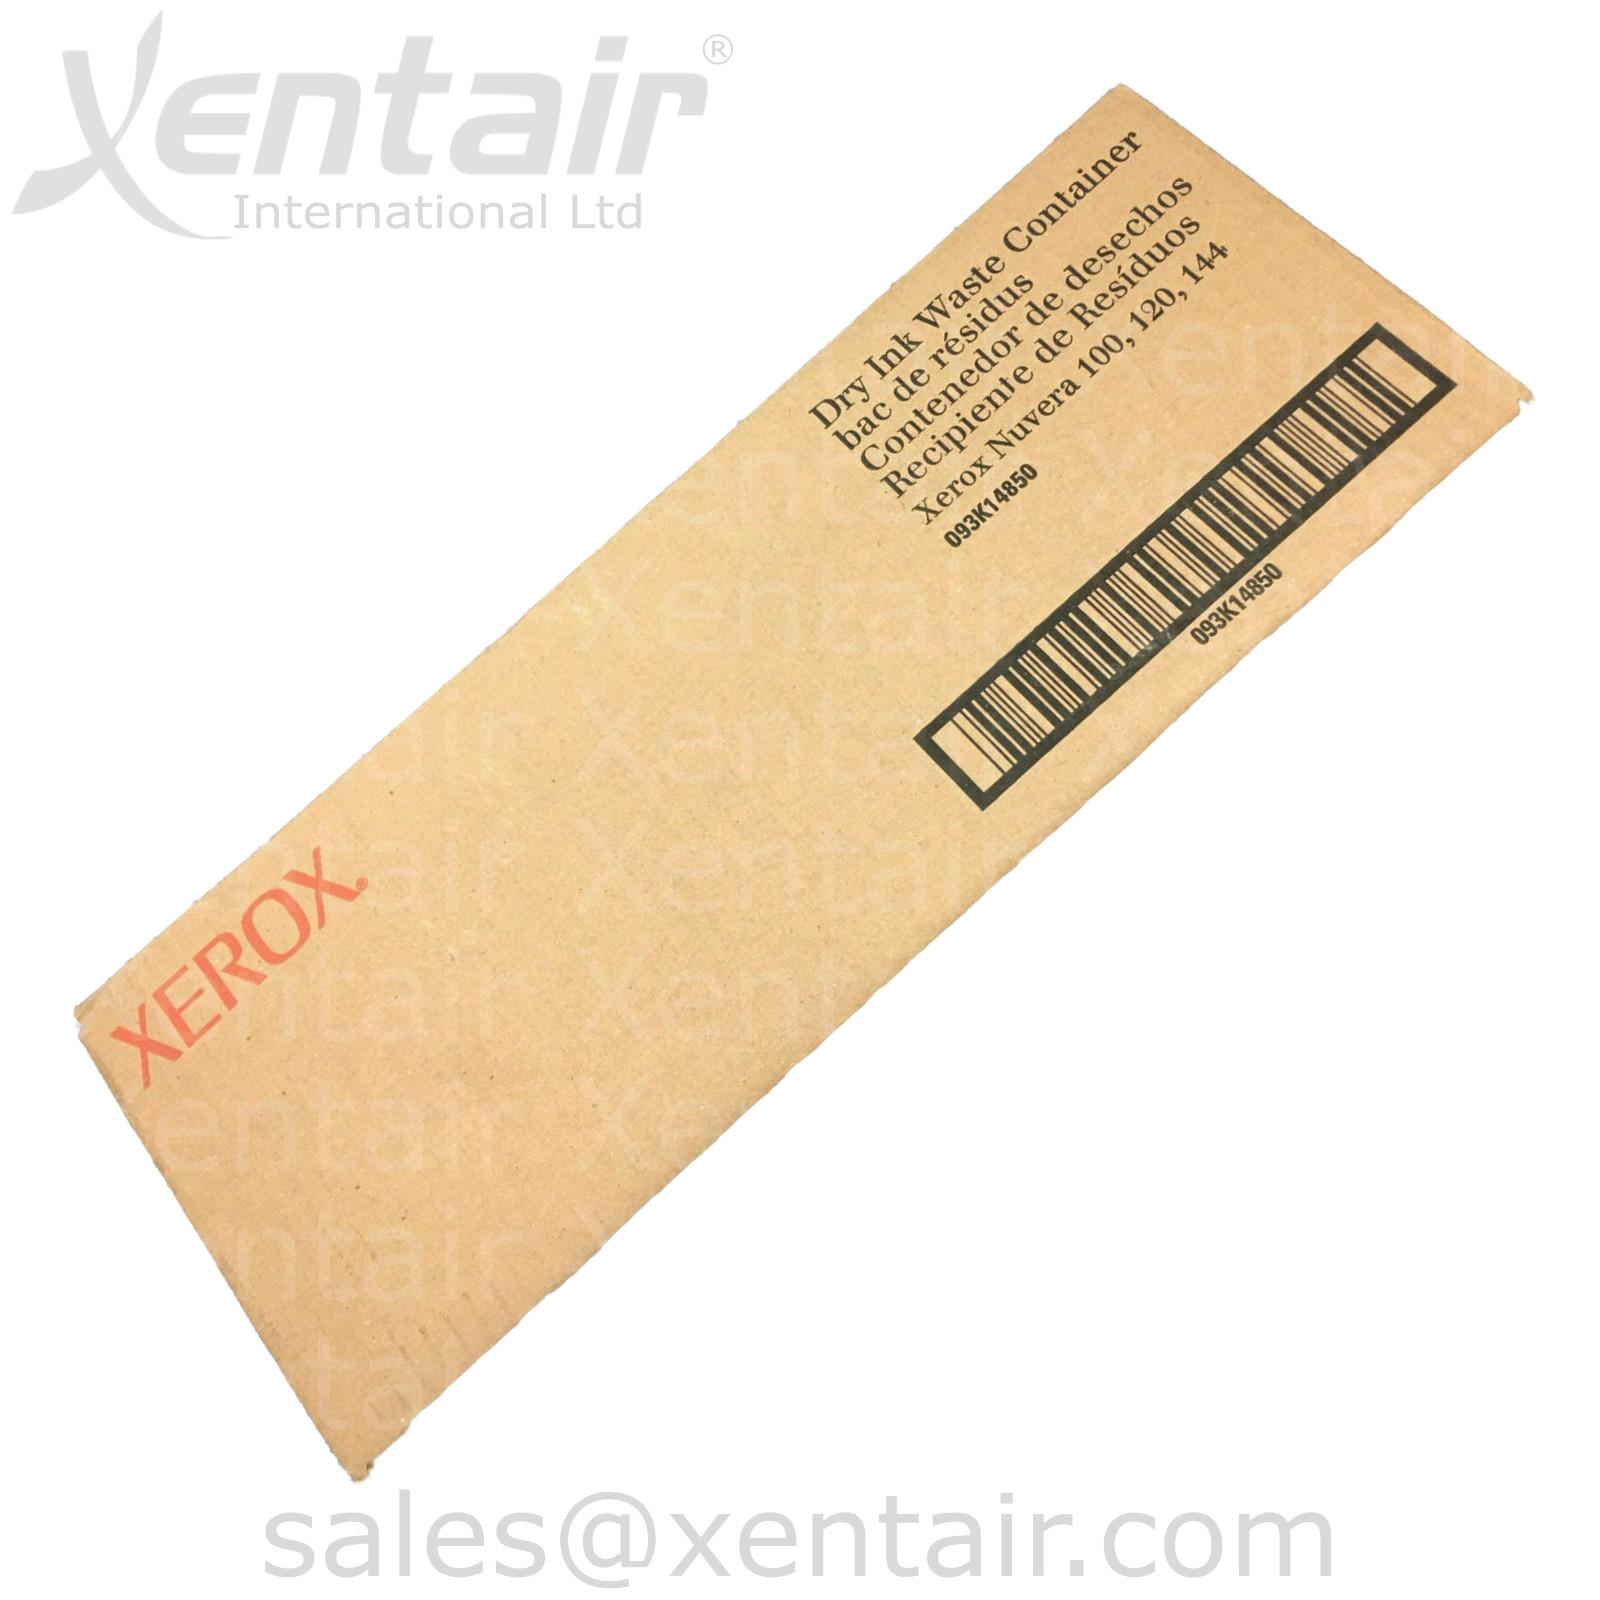 Xerox® Nuvera™ 100 120 144 Dry Ink Waste Container 093K08800 093K08801 093K14850 641S00525